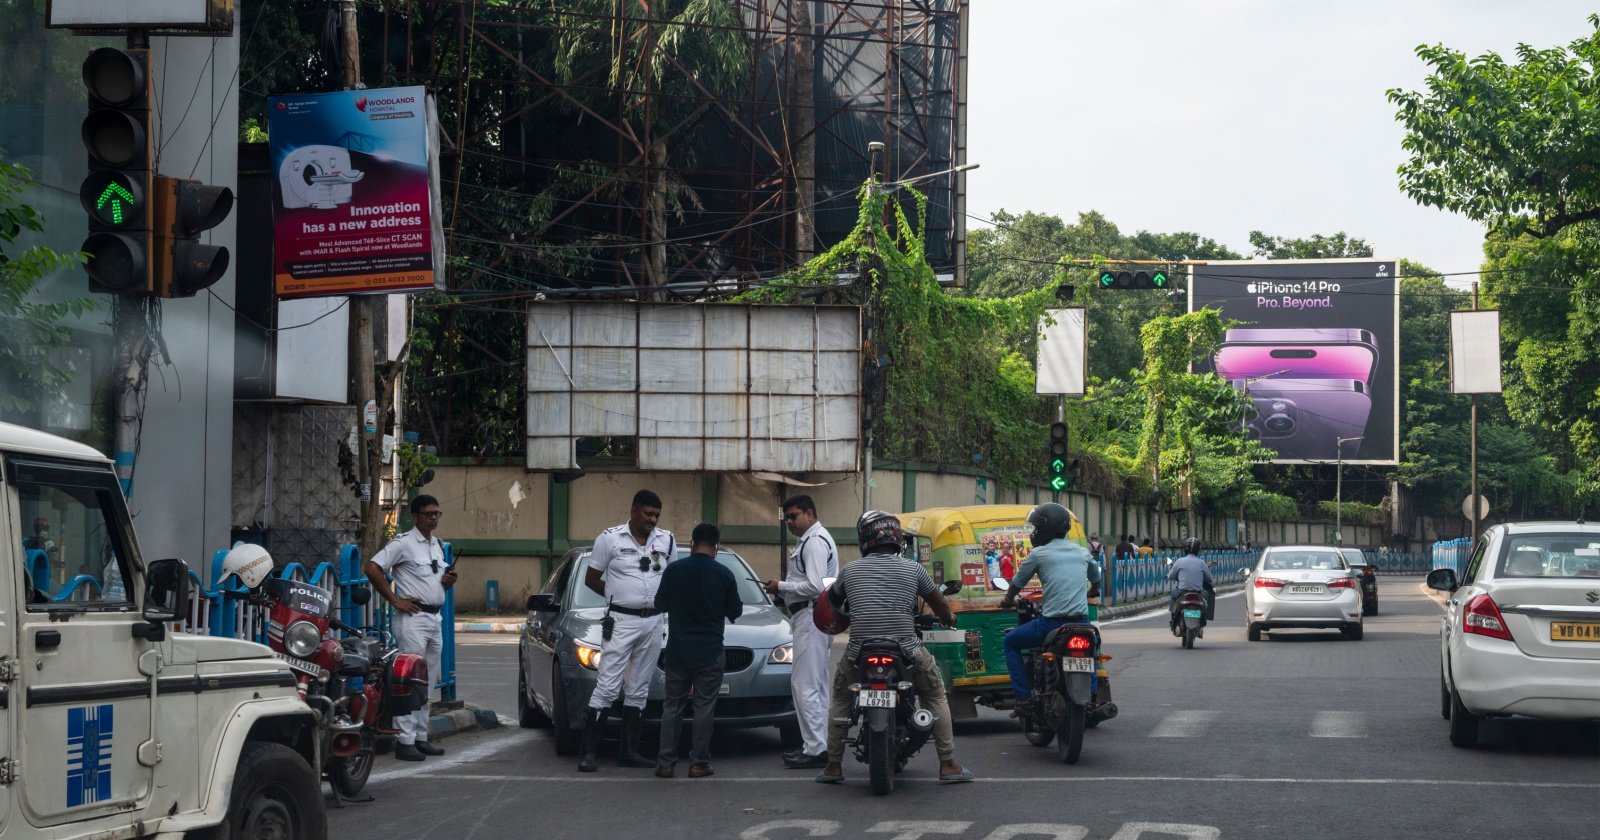 Driving Rules For Mumbai Roads and Traffic Rules and Traffic Signs For Mumbai Roads